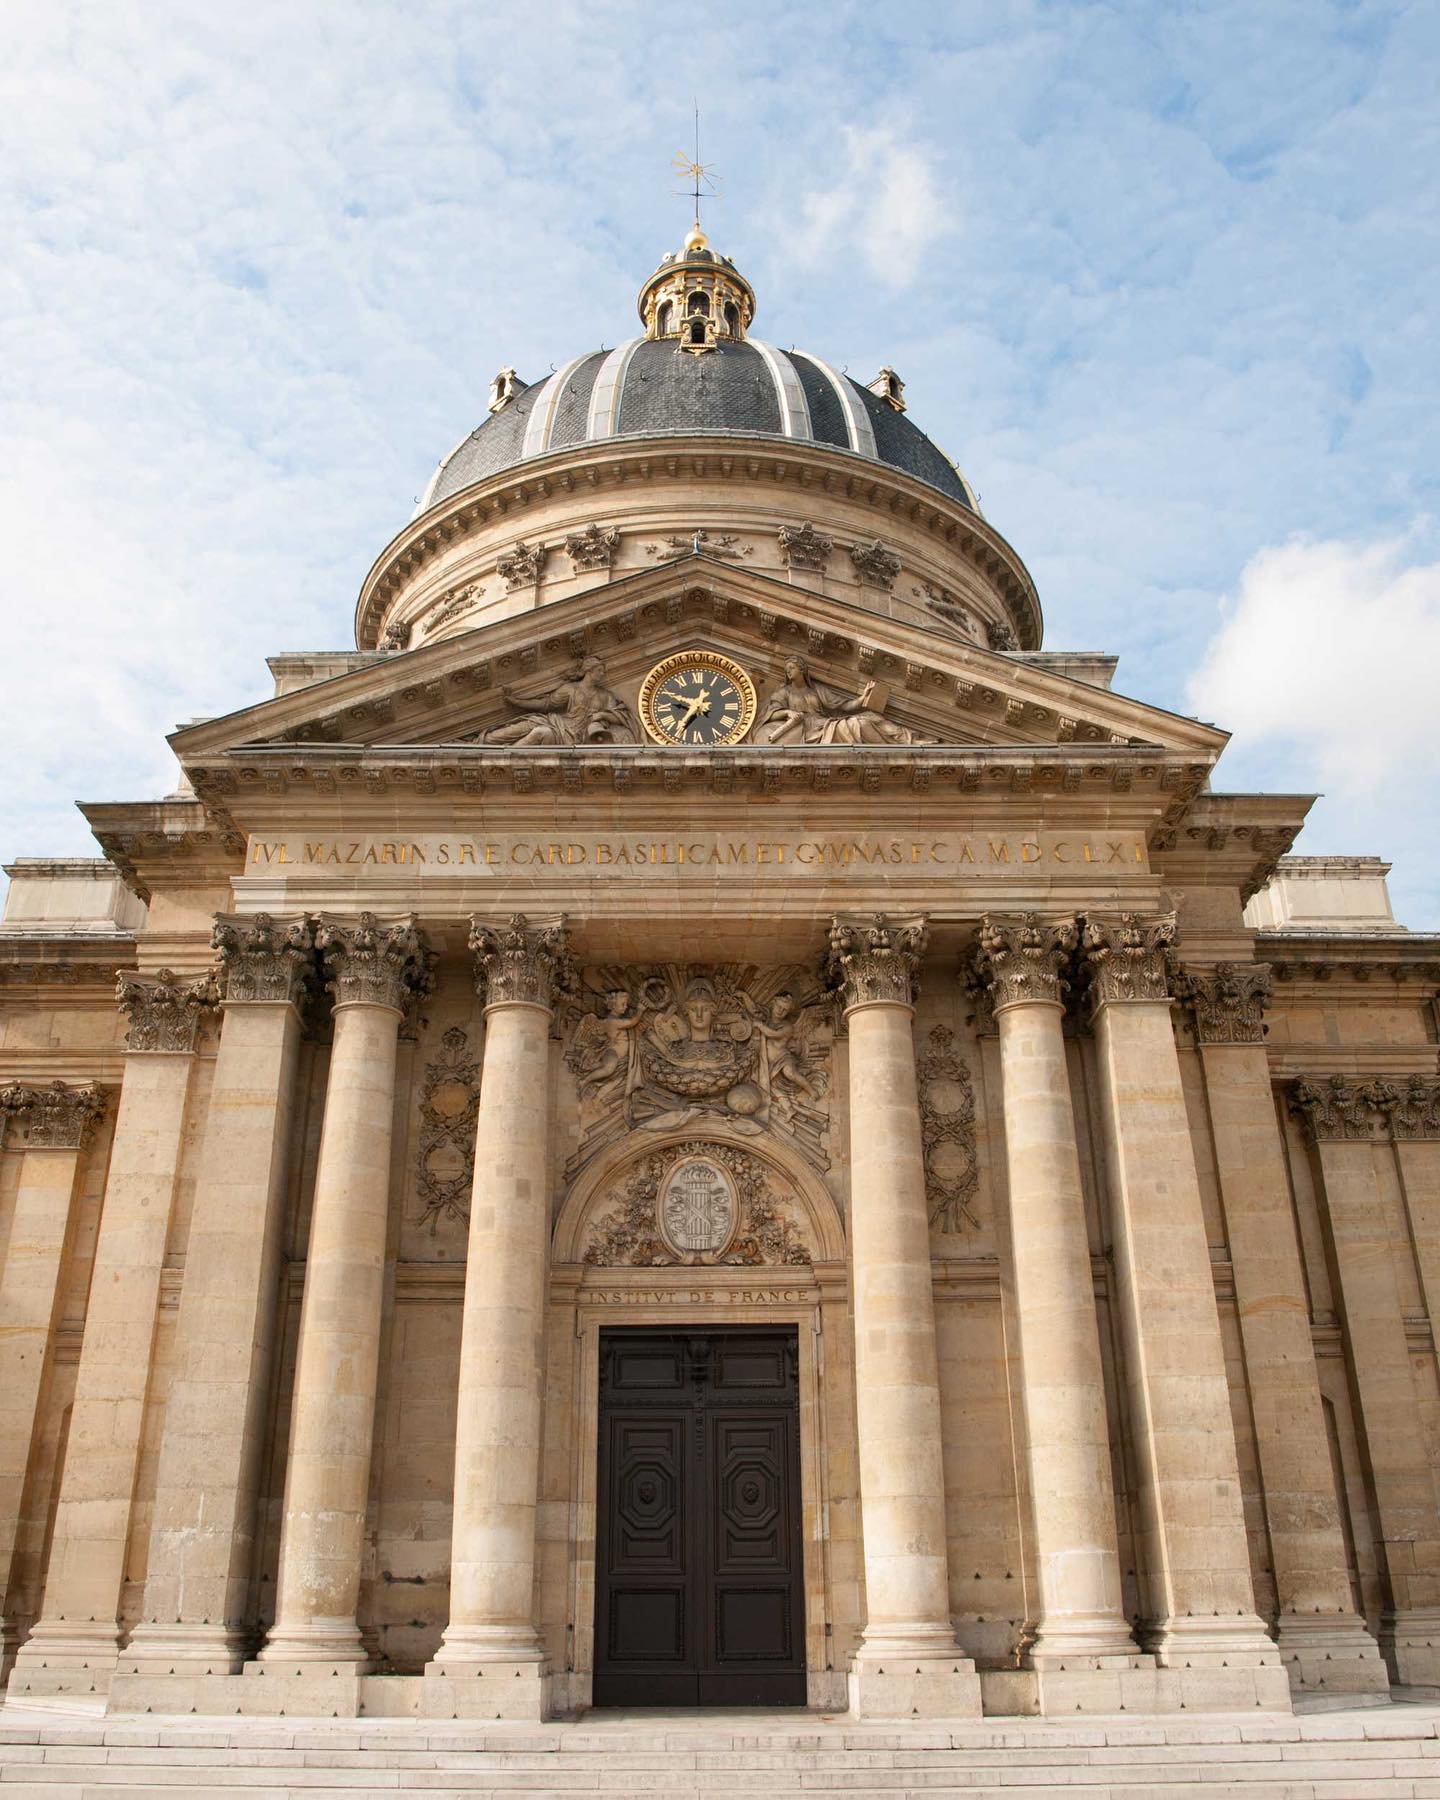 Sitting alongside the Seine, is the grand building of the Acad&eacute;mie Fran&ccedil;aise, founded in 1634. This is the main French council for matters about the French language and publishes its own dictionary 📚🇫🇷
. #dictionary #dictionnaire #ac